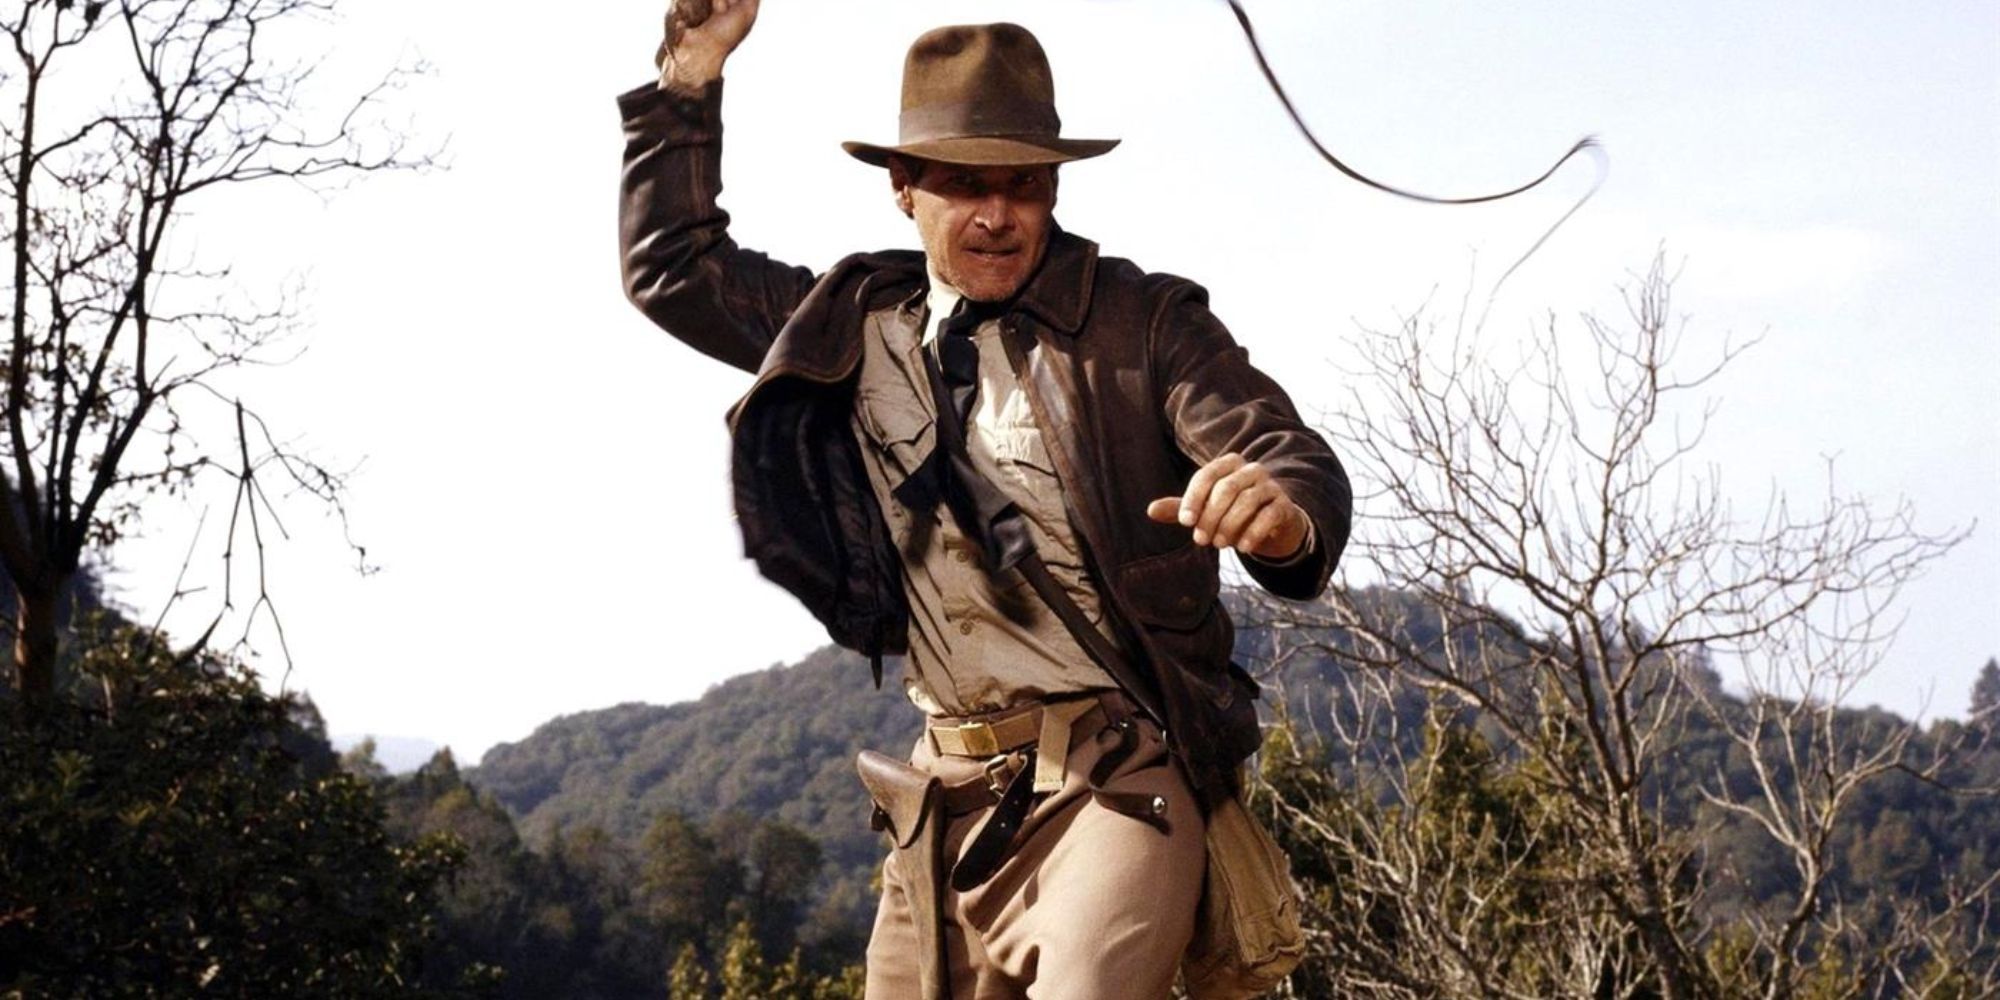 Harrison Ford as Indy in Raiders of the Lost Ark